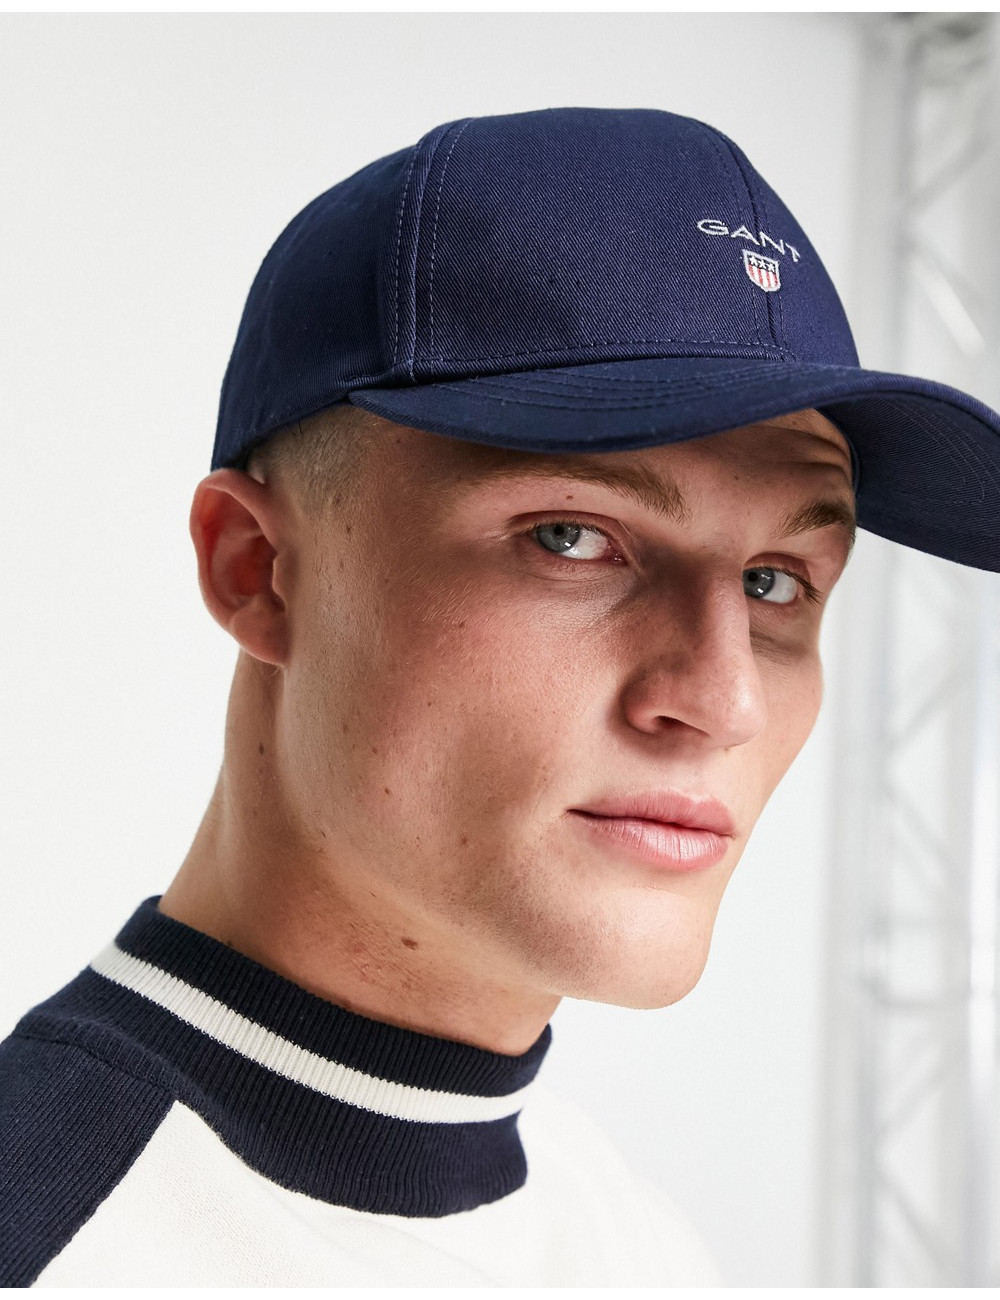 GANT cap in navy with small...